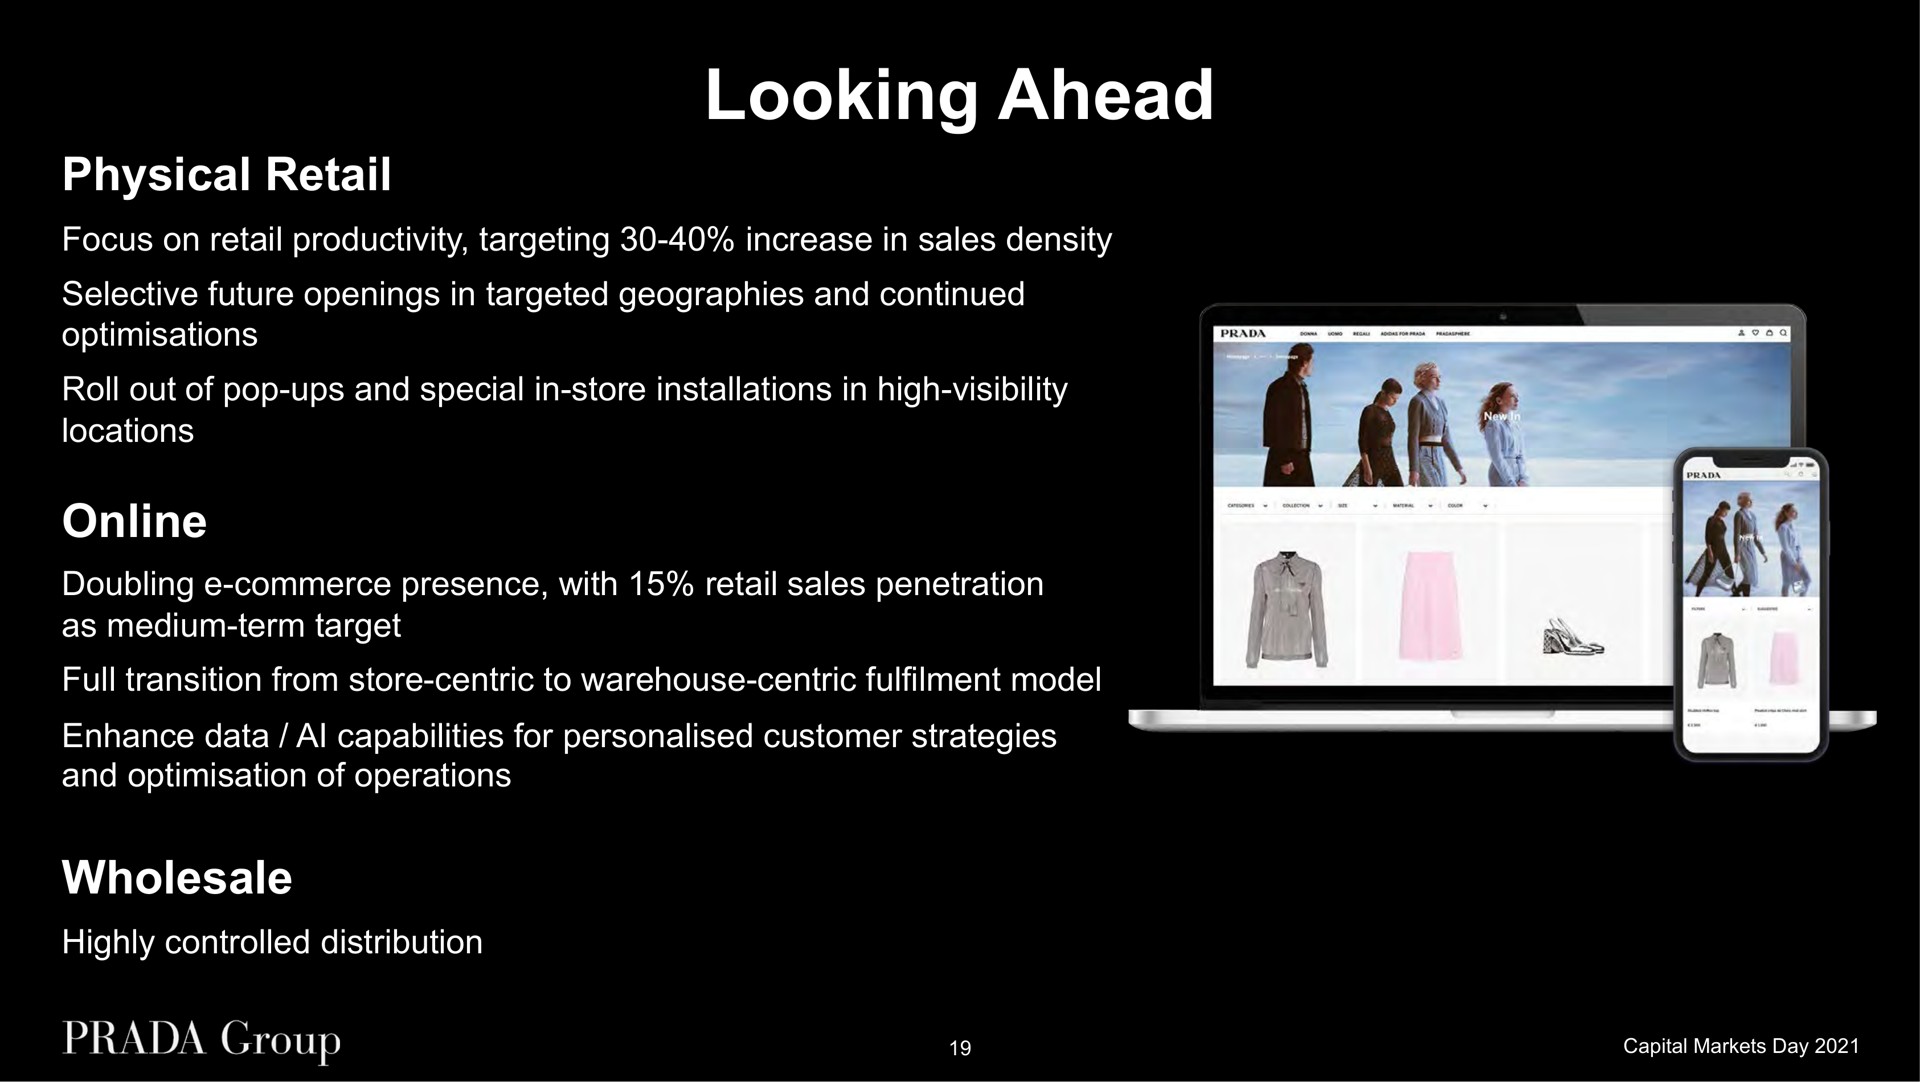 looking ahead physical retail focus on retail productivity targeting increase in sales density selective future openings in targeted geographies and continued roll out of pop ups and special in store installations in high visibility locations doubling commerce presence with retail sales penetration as medium term target full transition from store centric to warehouse centric model enhance data capabilities for customer strategies and of operations wholesale highly controlled distribution | Prada